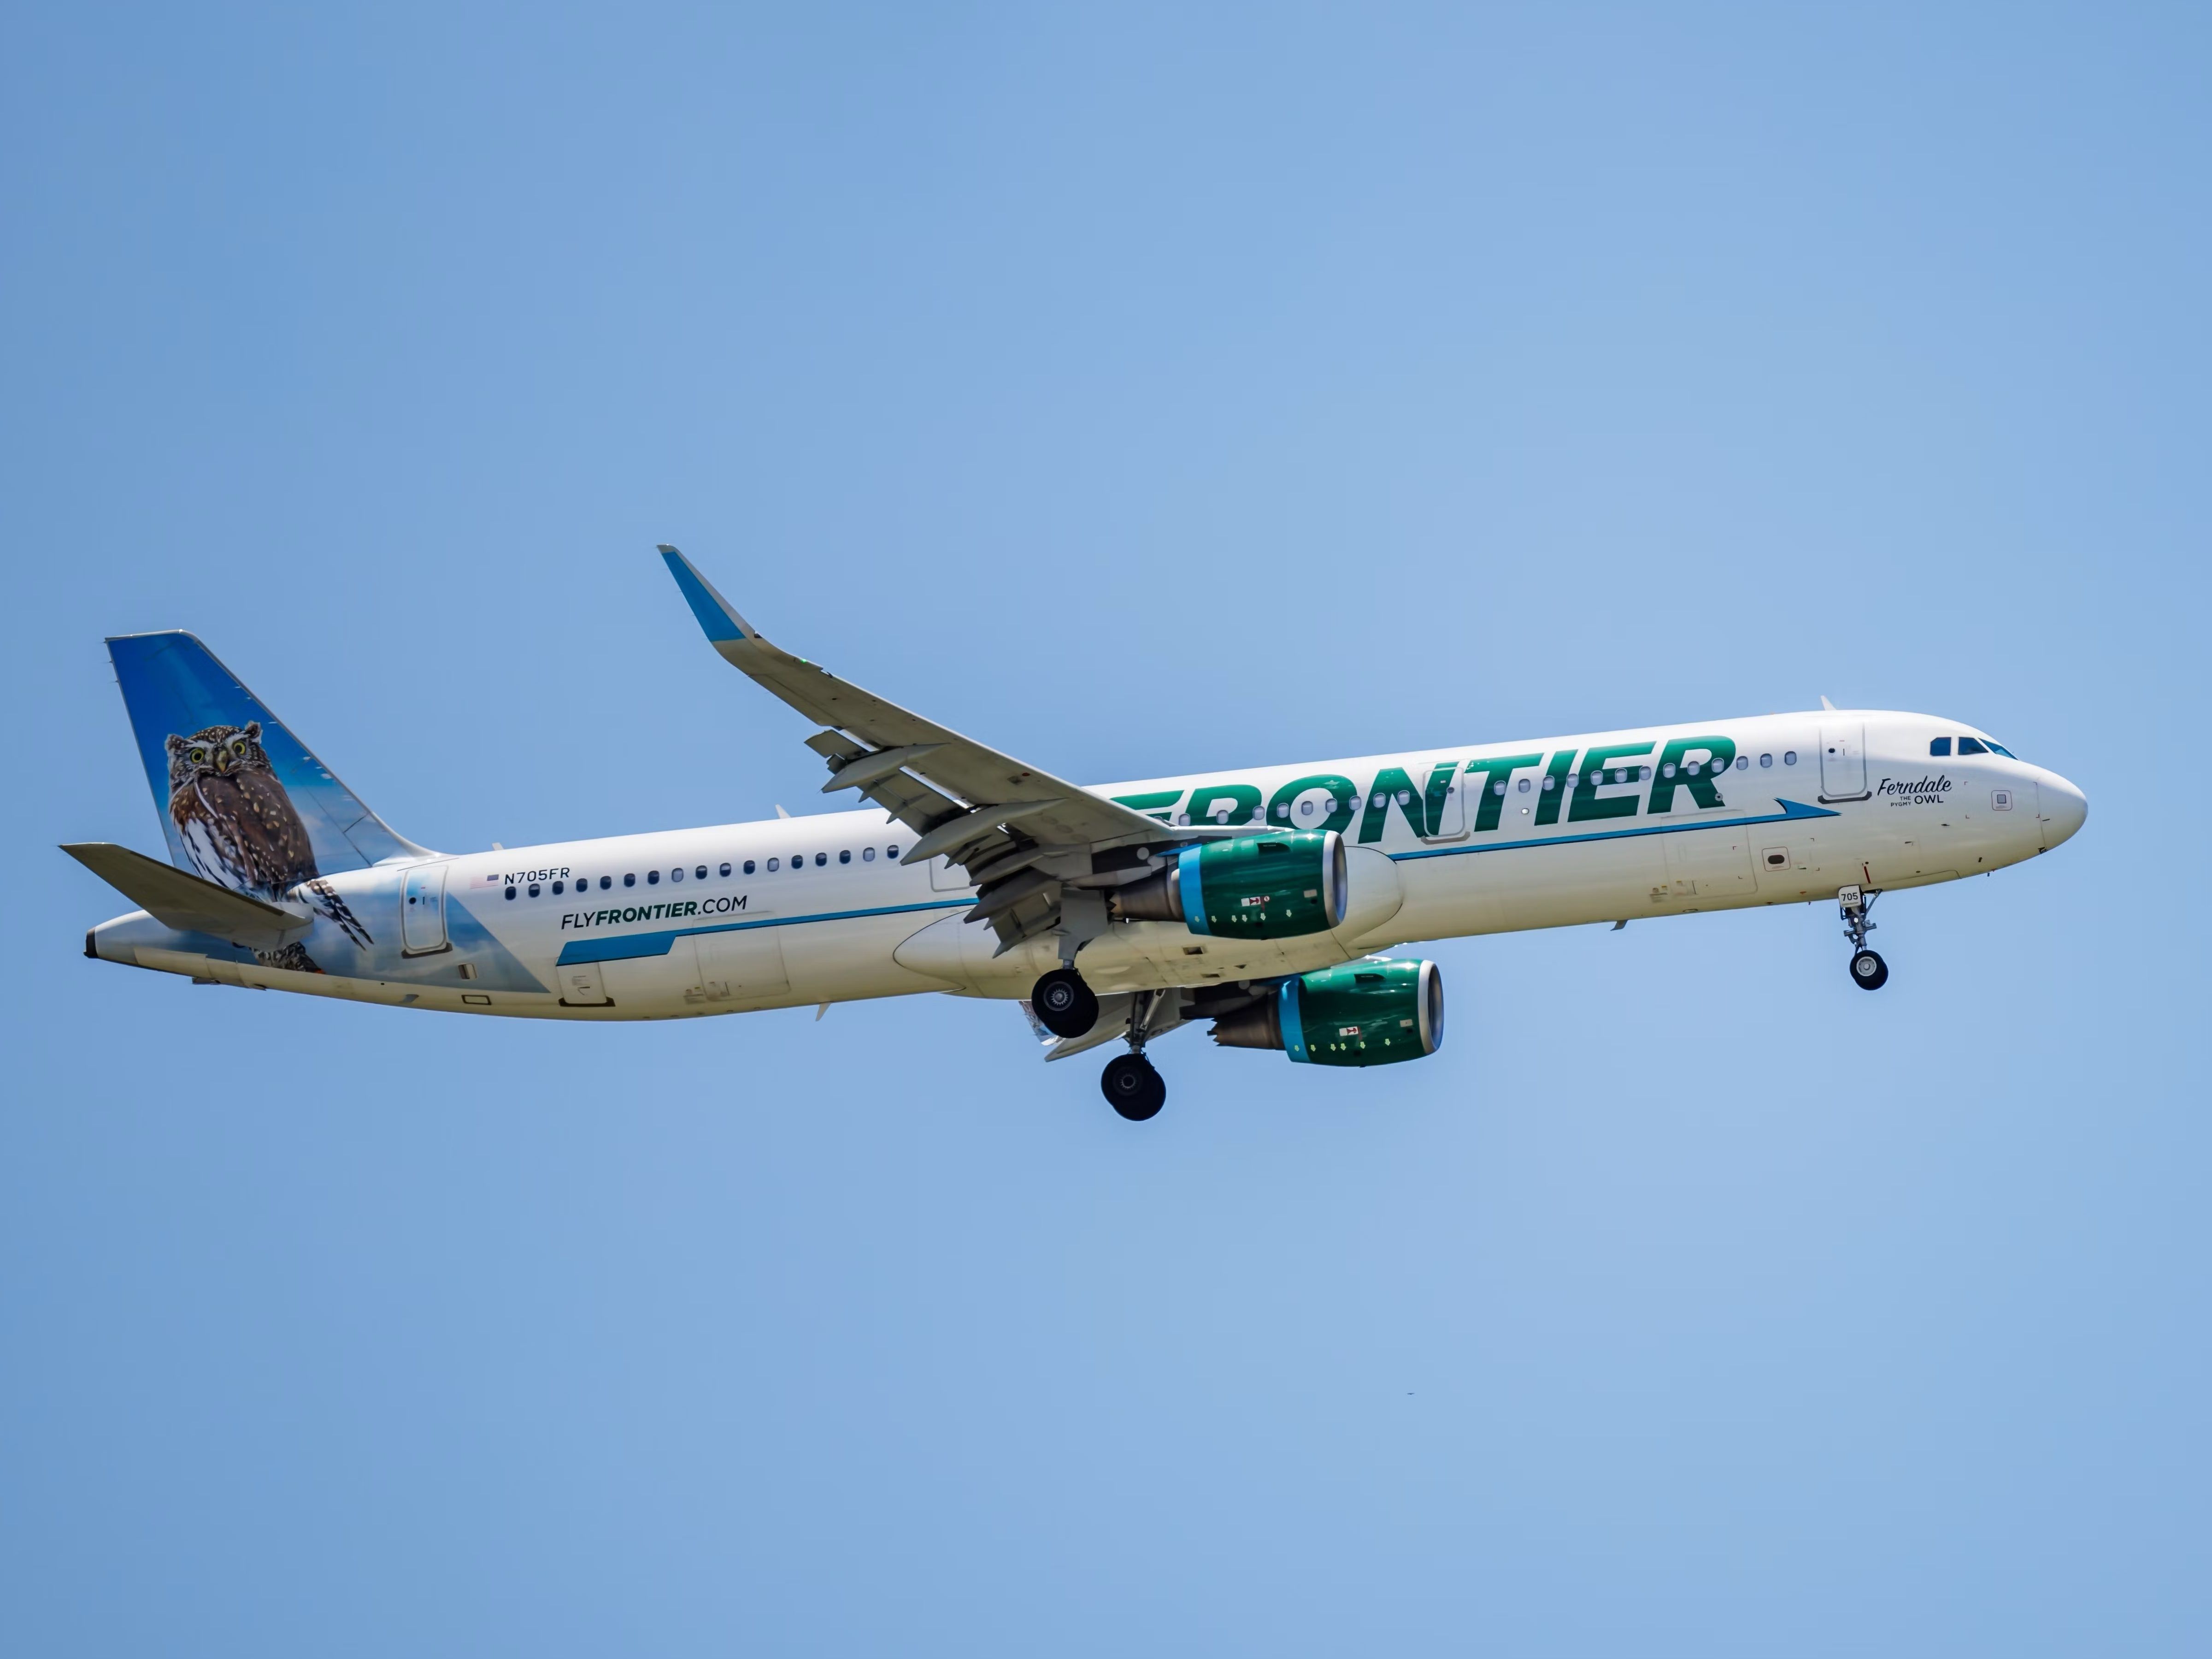 A Frontier Airlines Airbus A321 Flying in the sky.